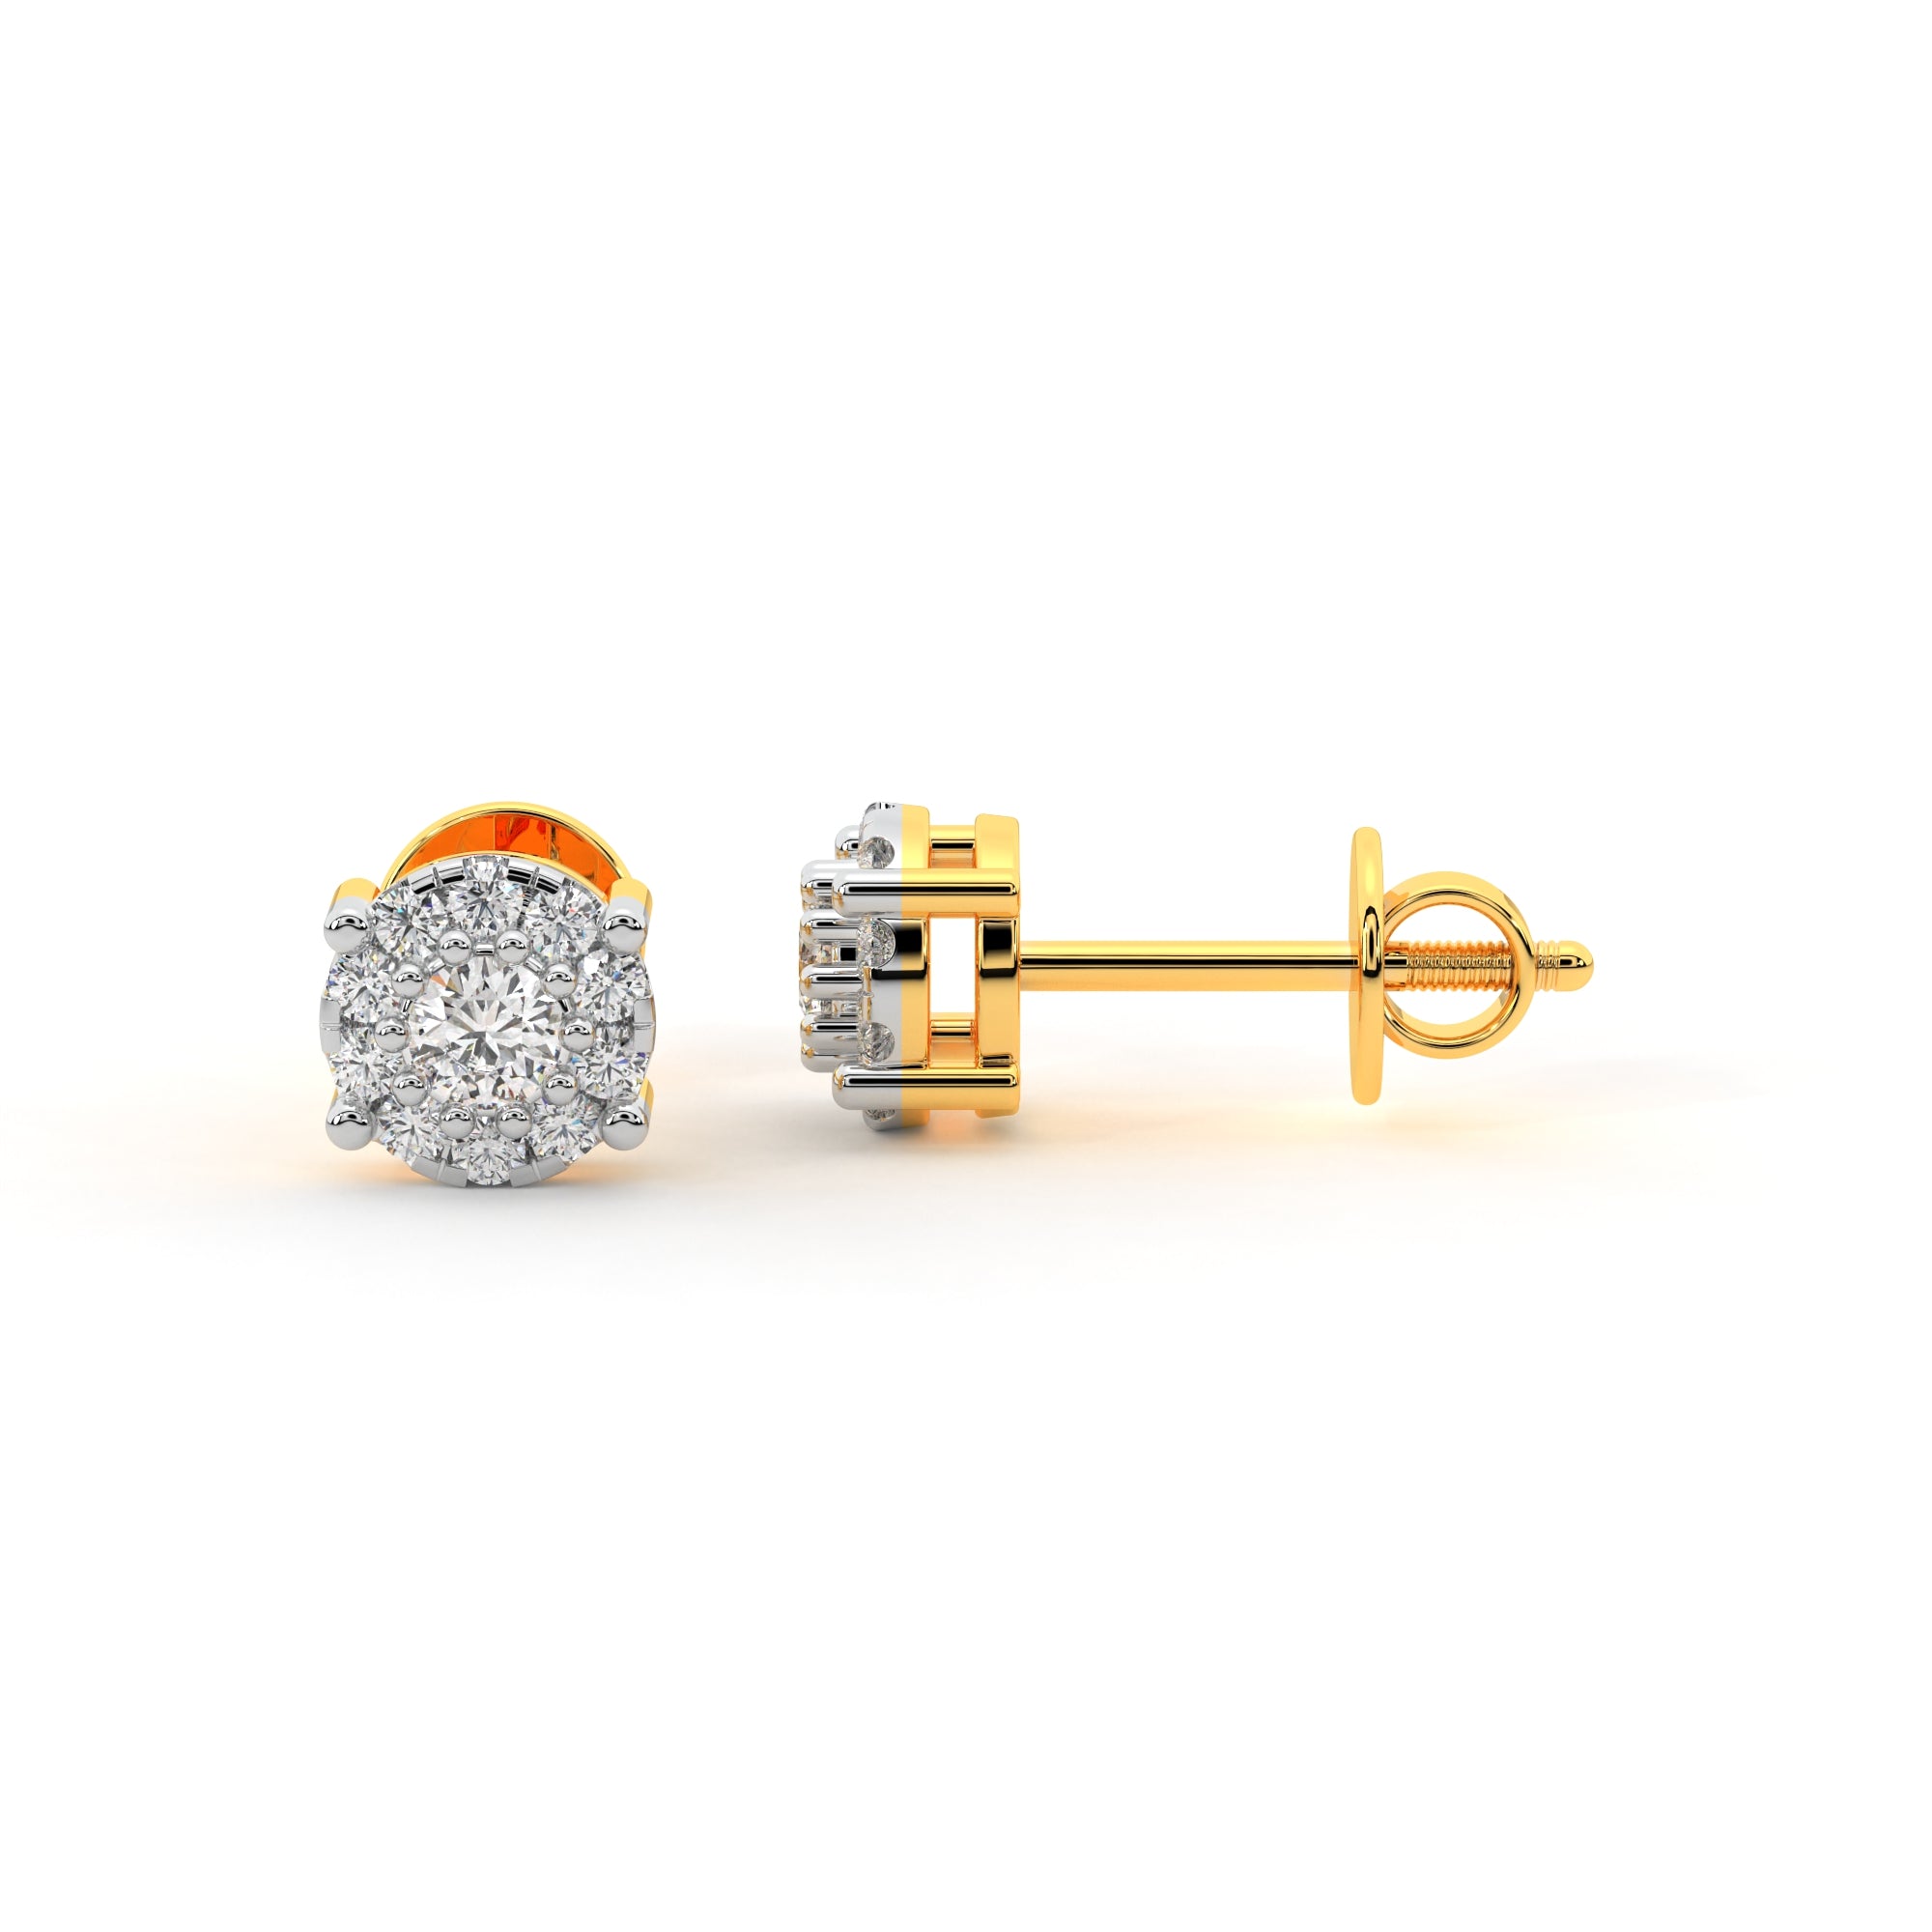 Diamond Studs for Every Occasion